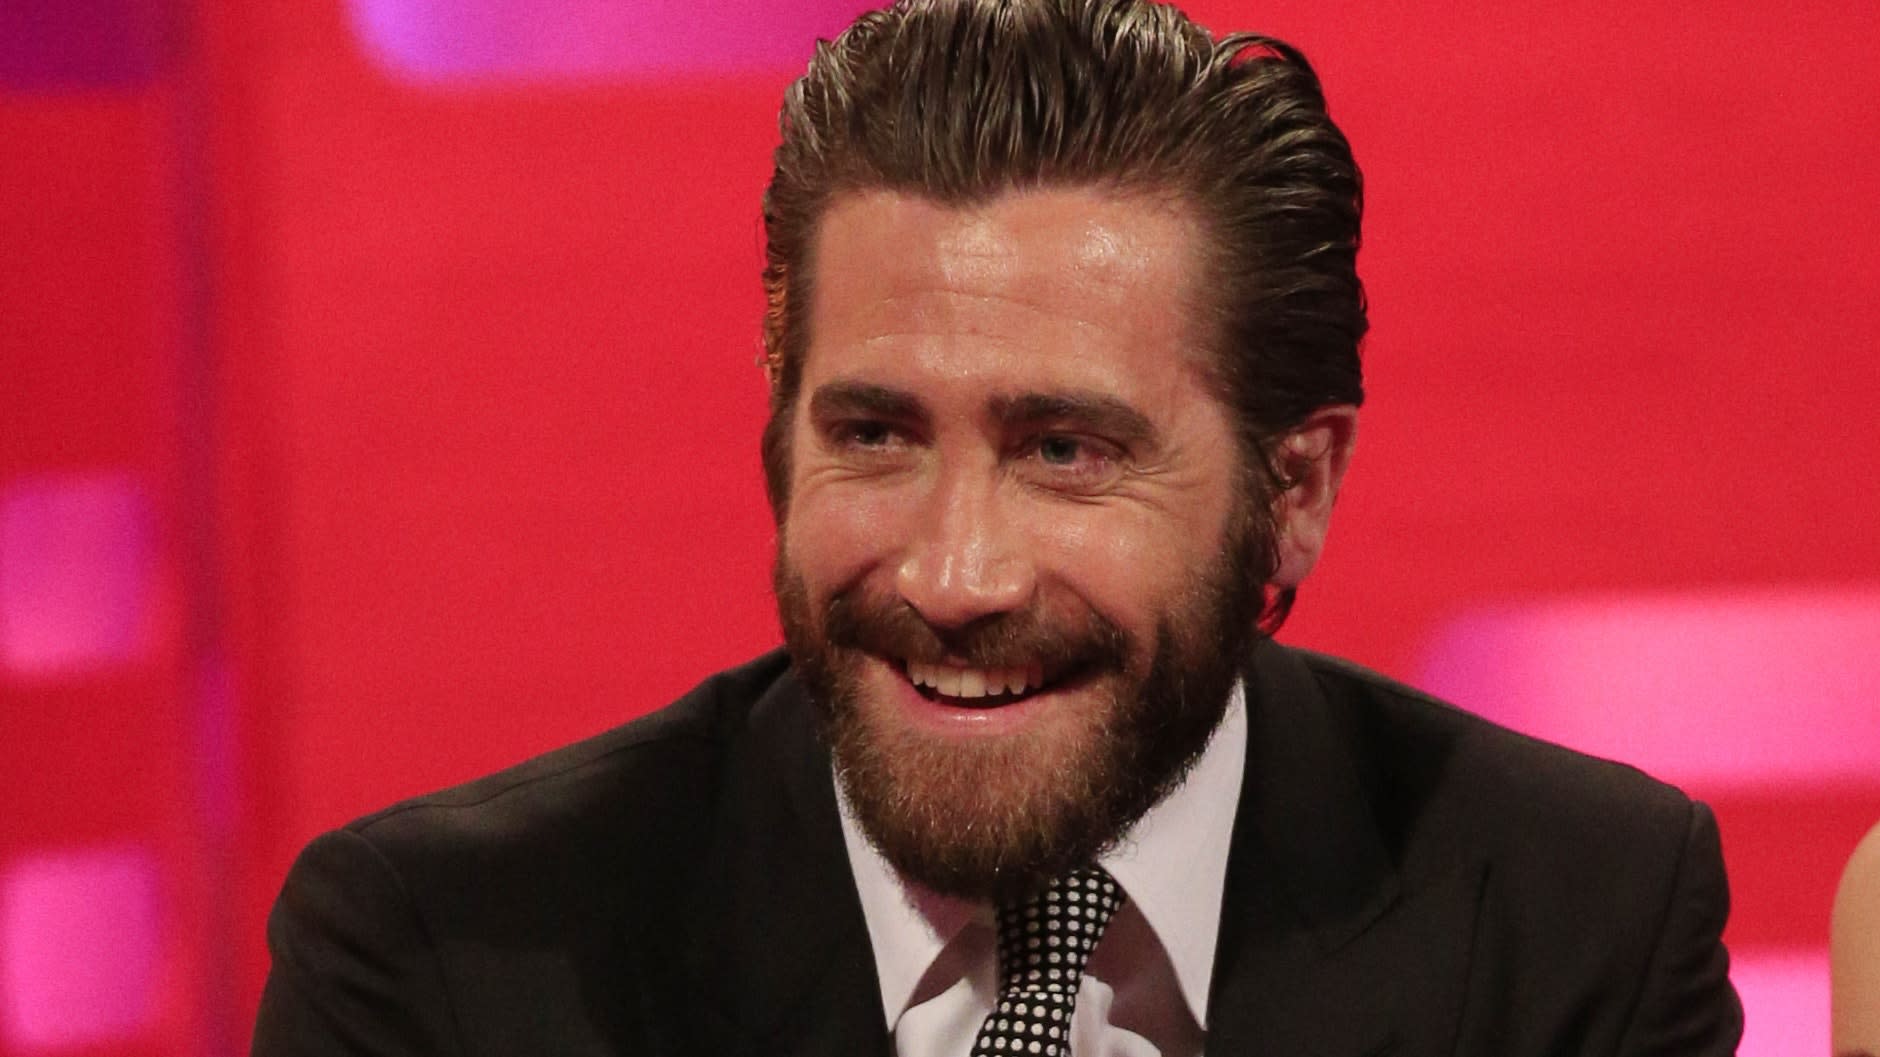 Jake Gyllenhaal joins Instagram and confirms role in ...